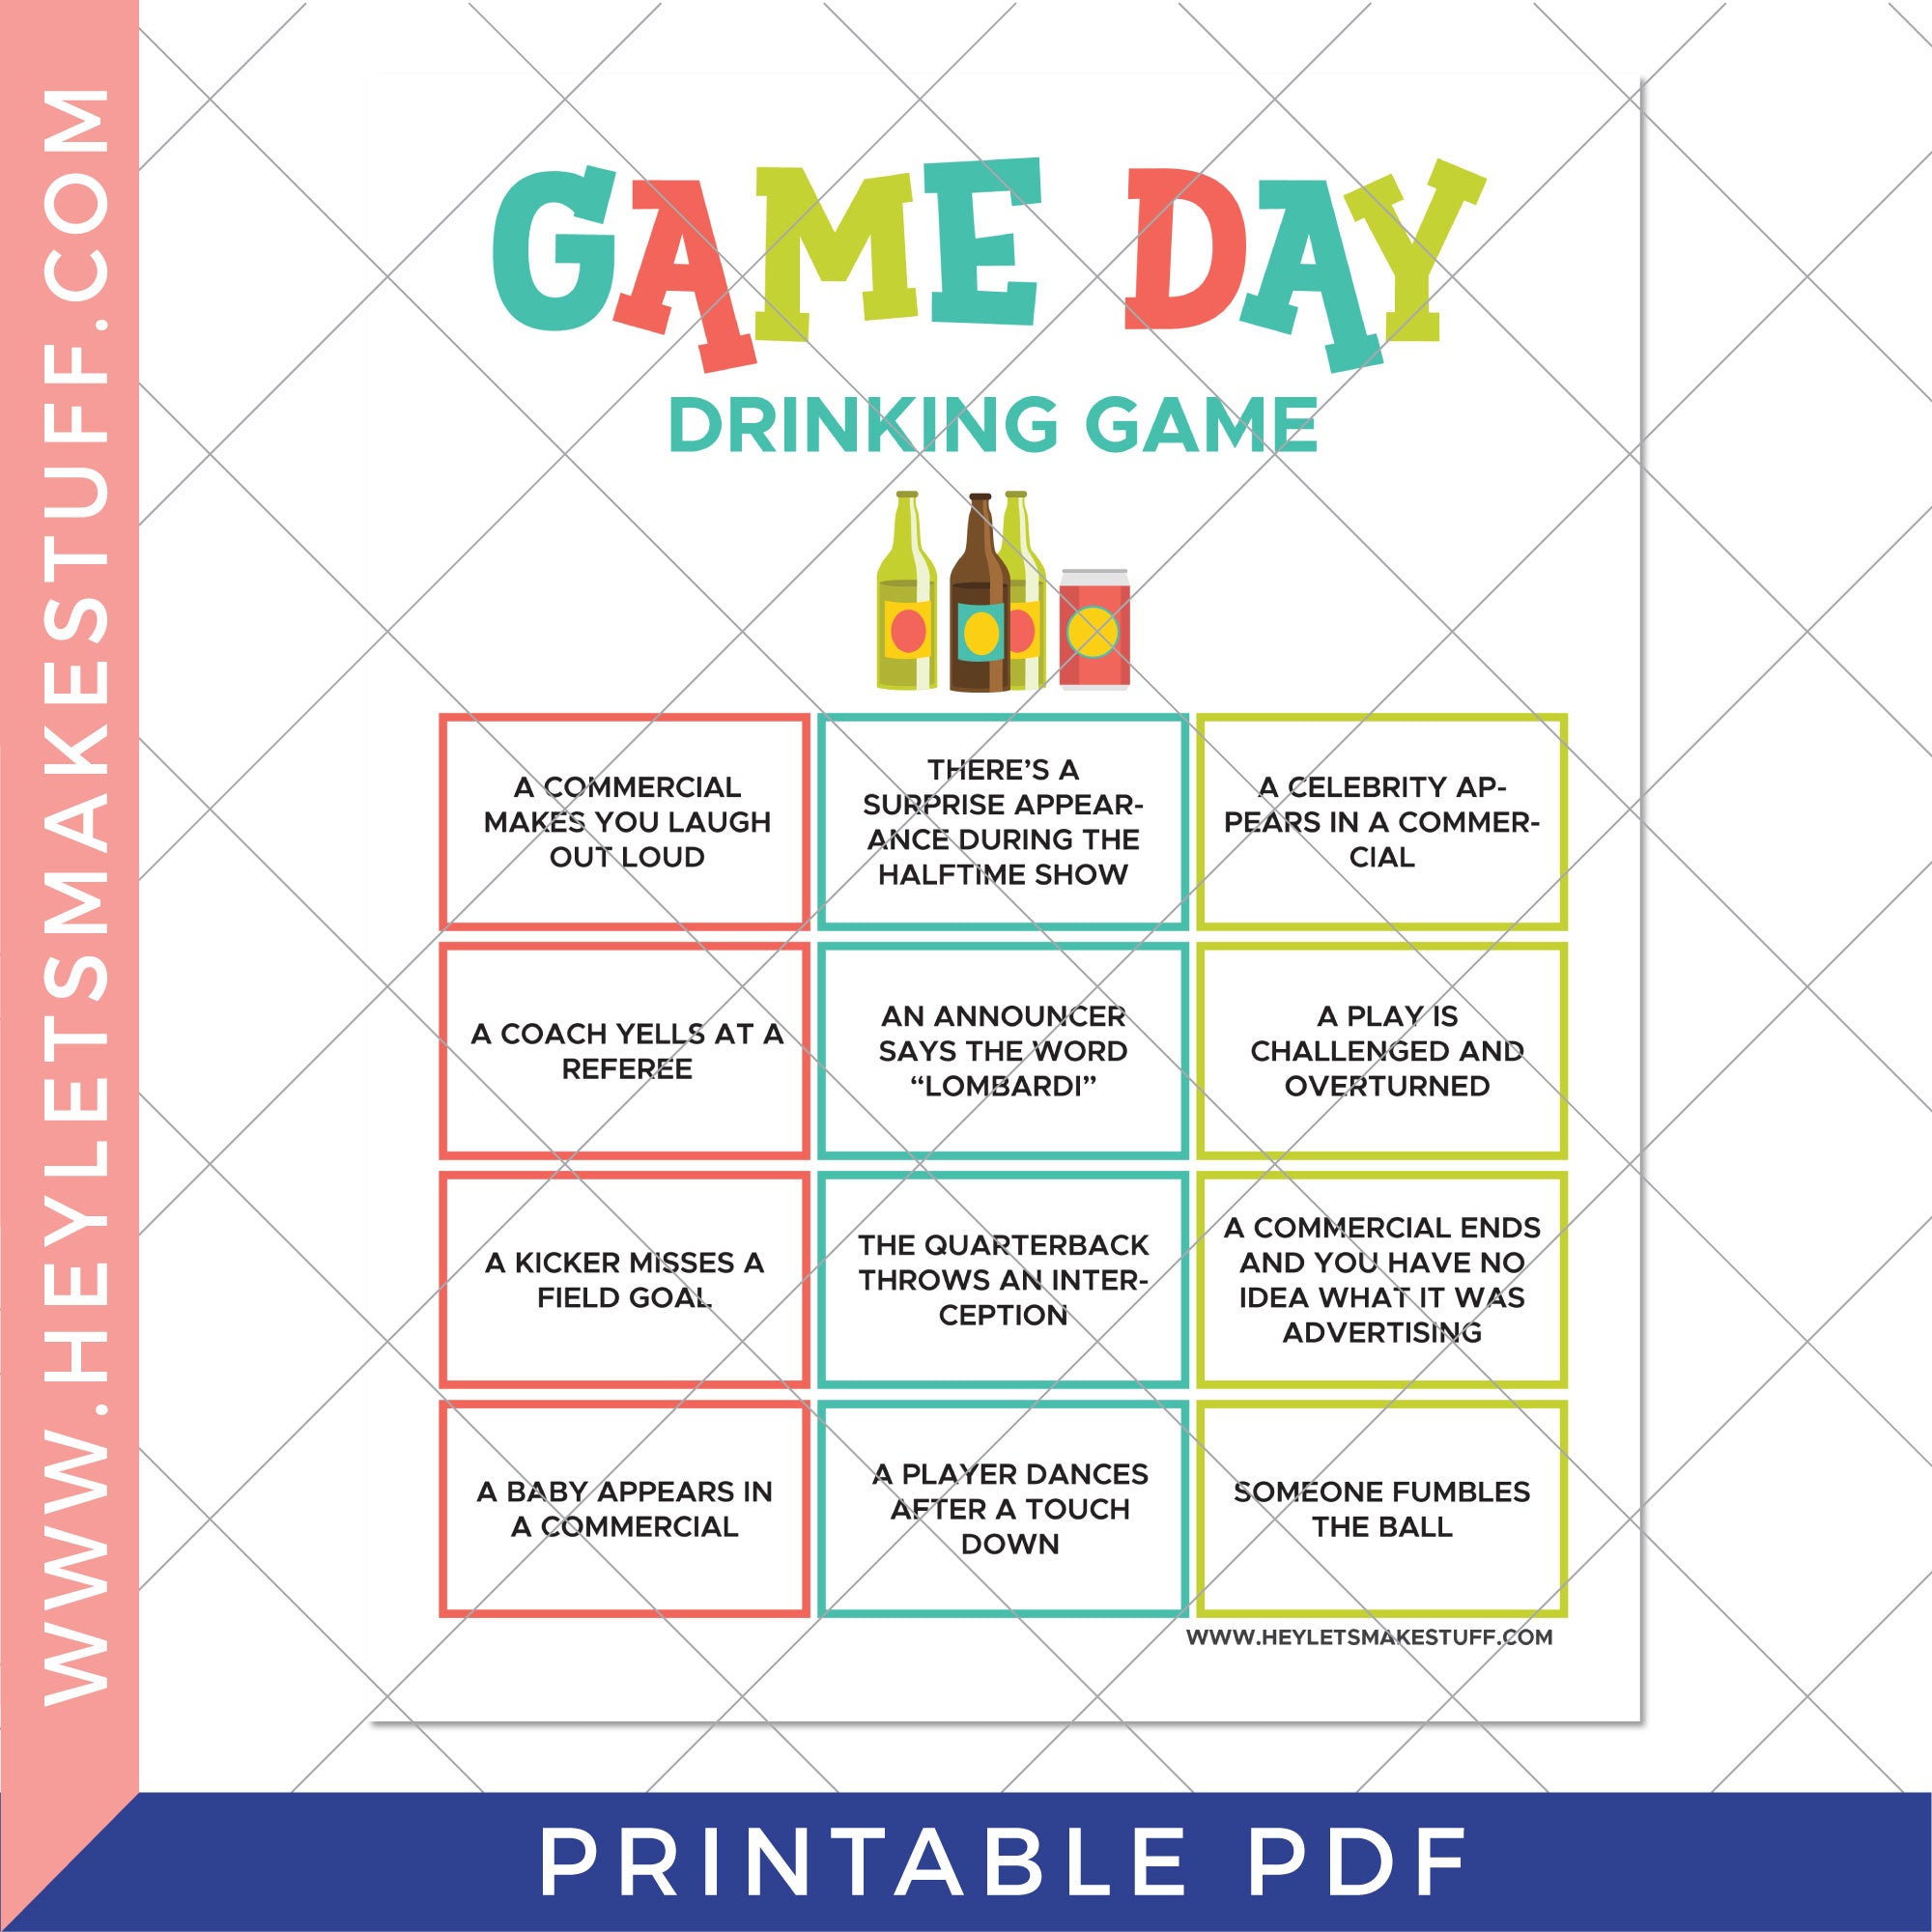 How to make a drinking game